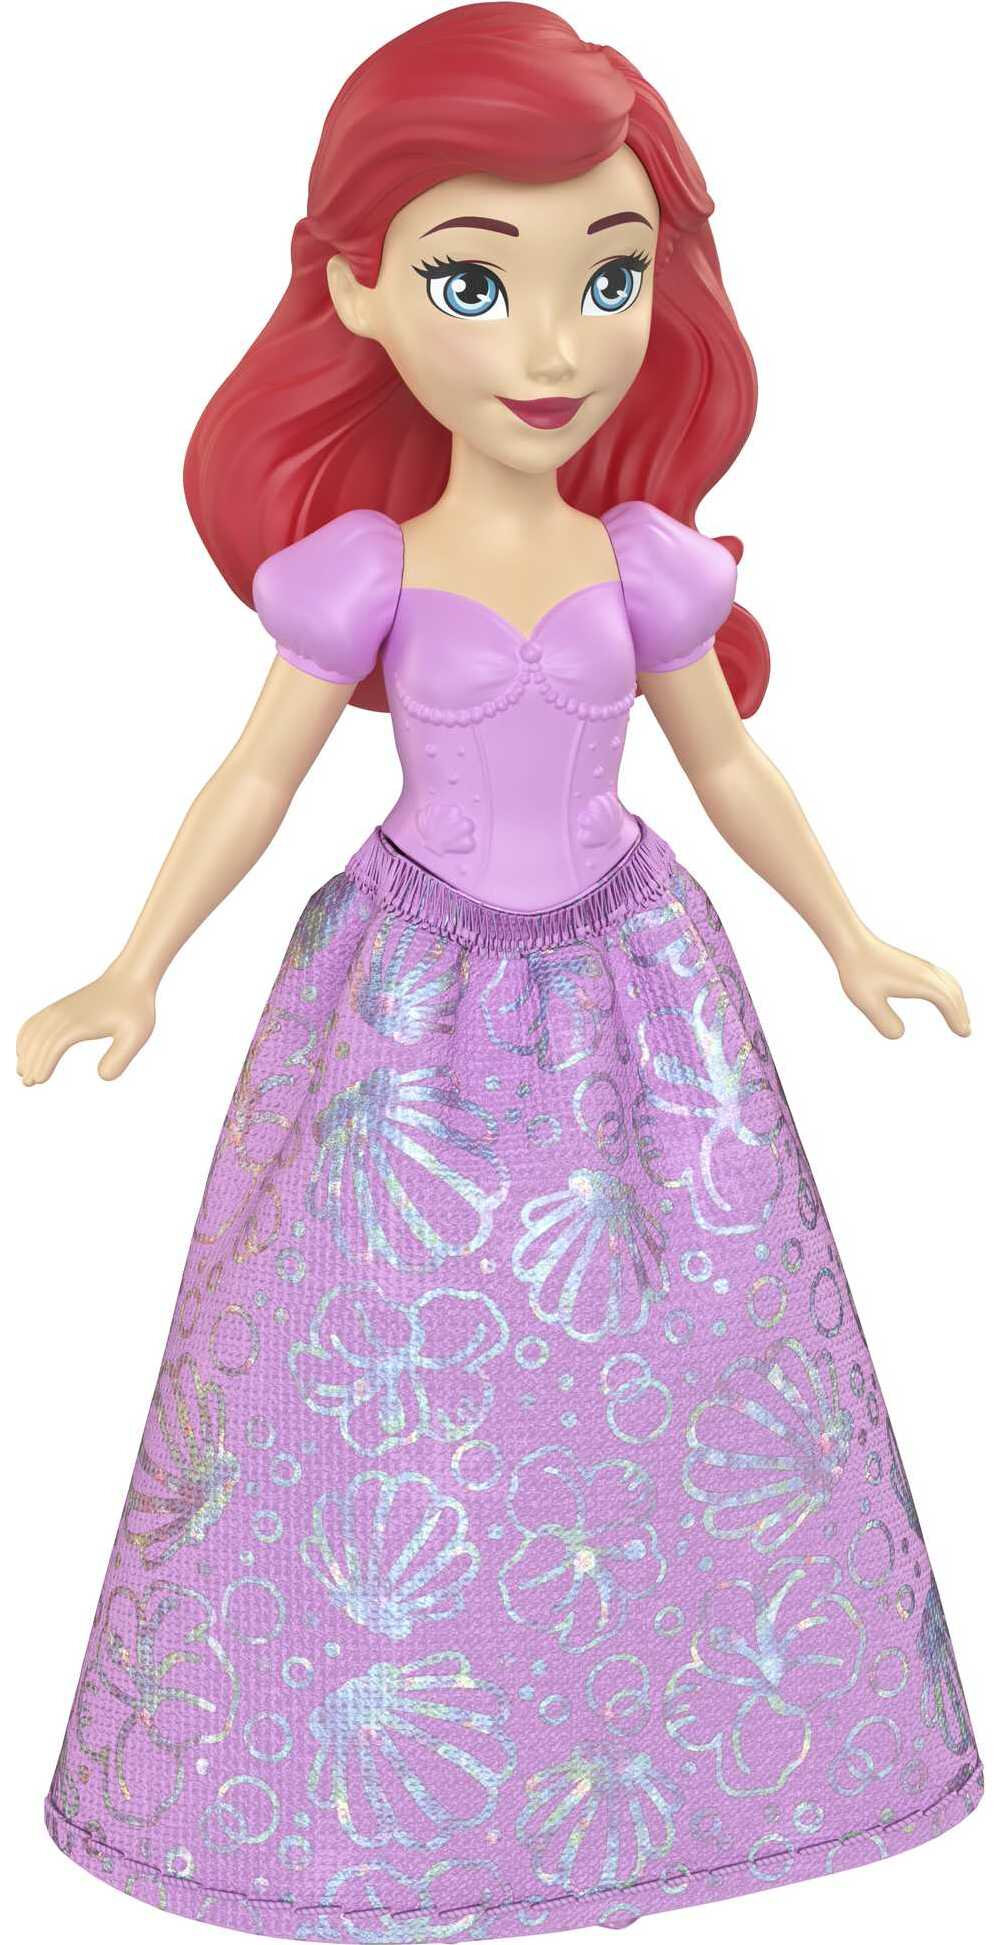 Disney Princess Ariel Small Doll, Red Hair & Blue Eyes, Signature Look with Pink Gown - image 3 of 6